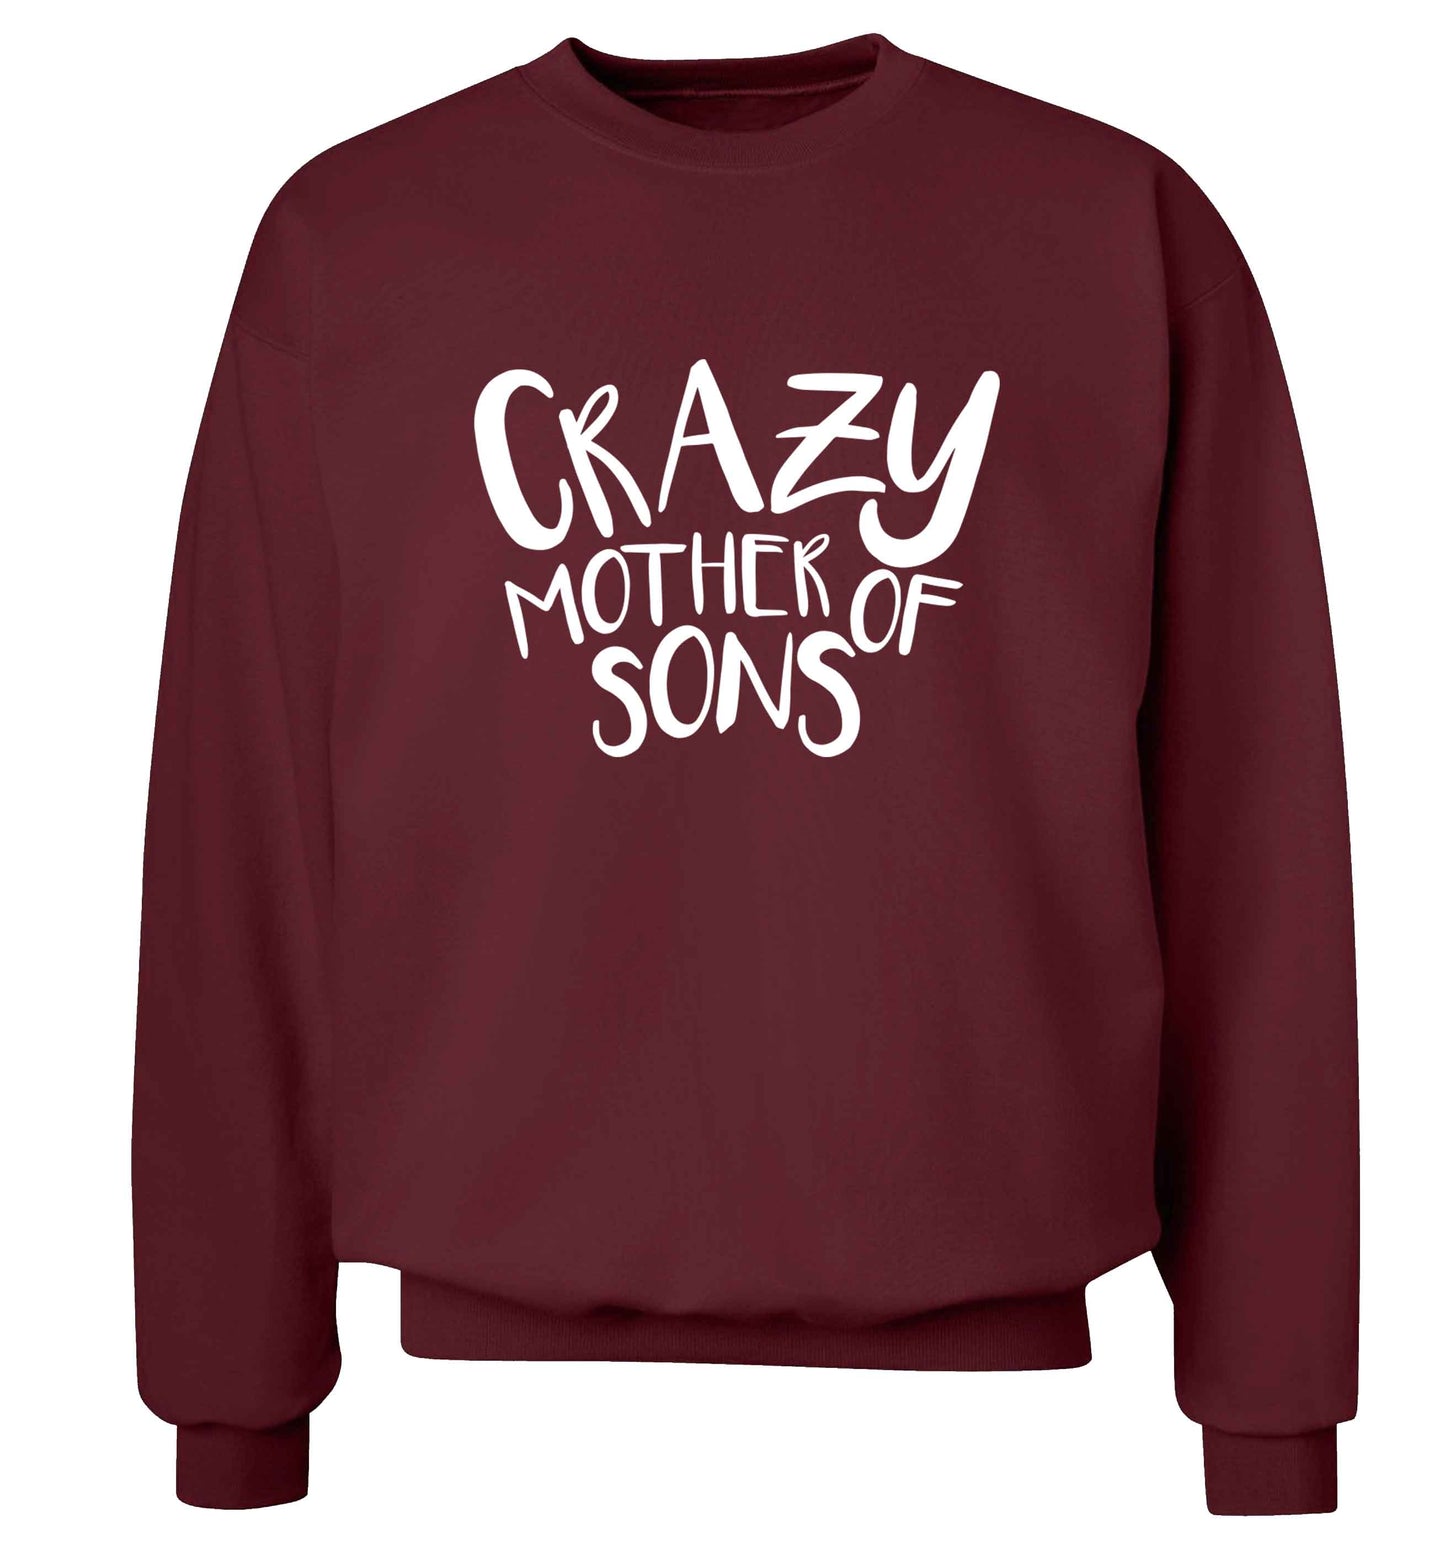 Crazy mother of sons adult's unisex maroon sweater 2XL